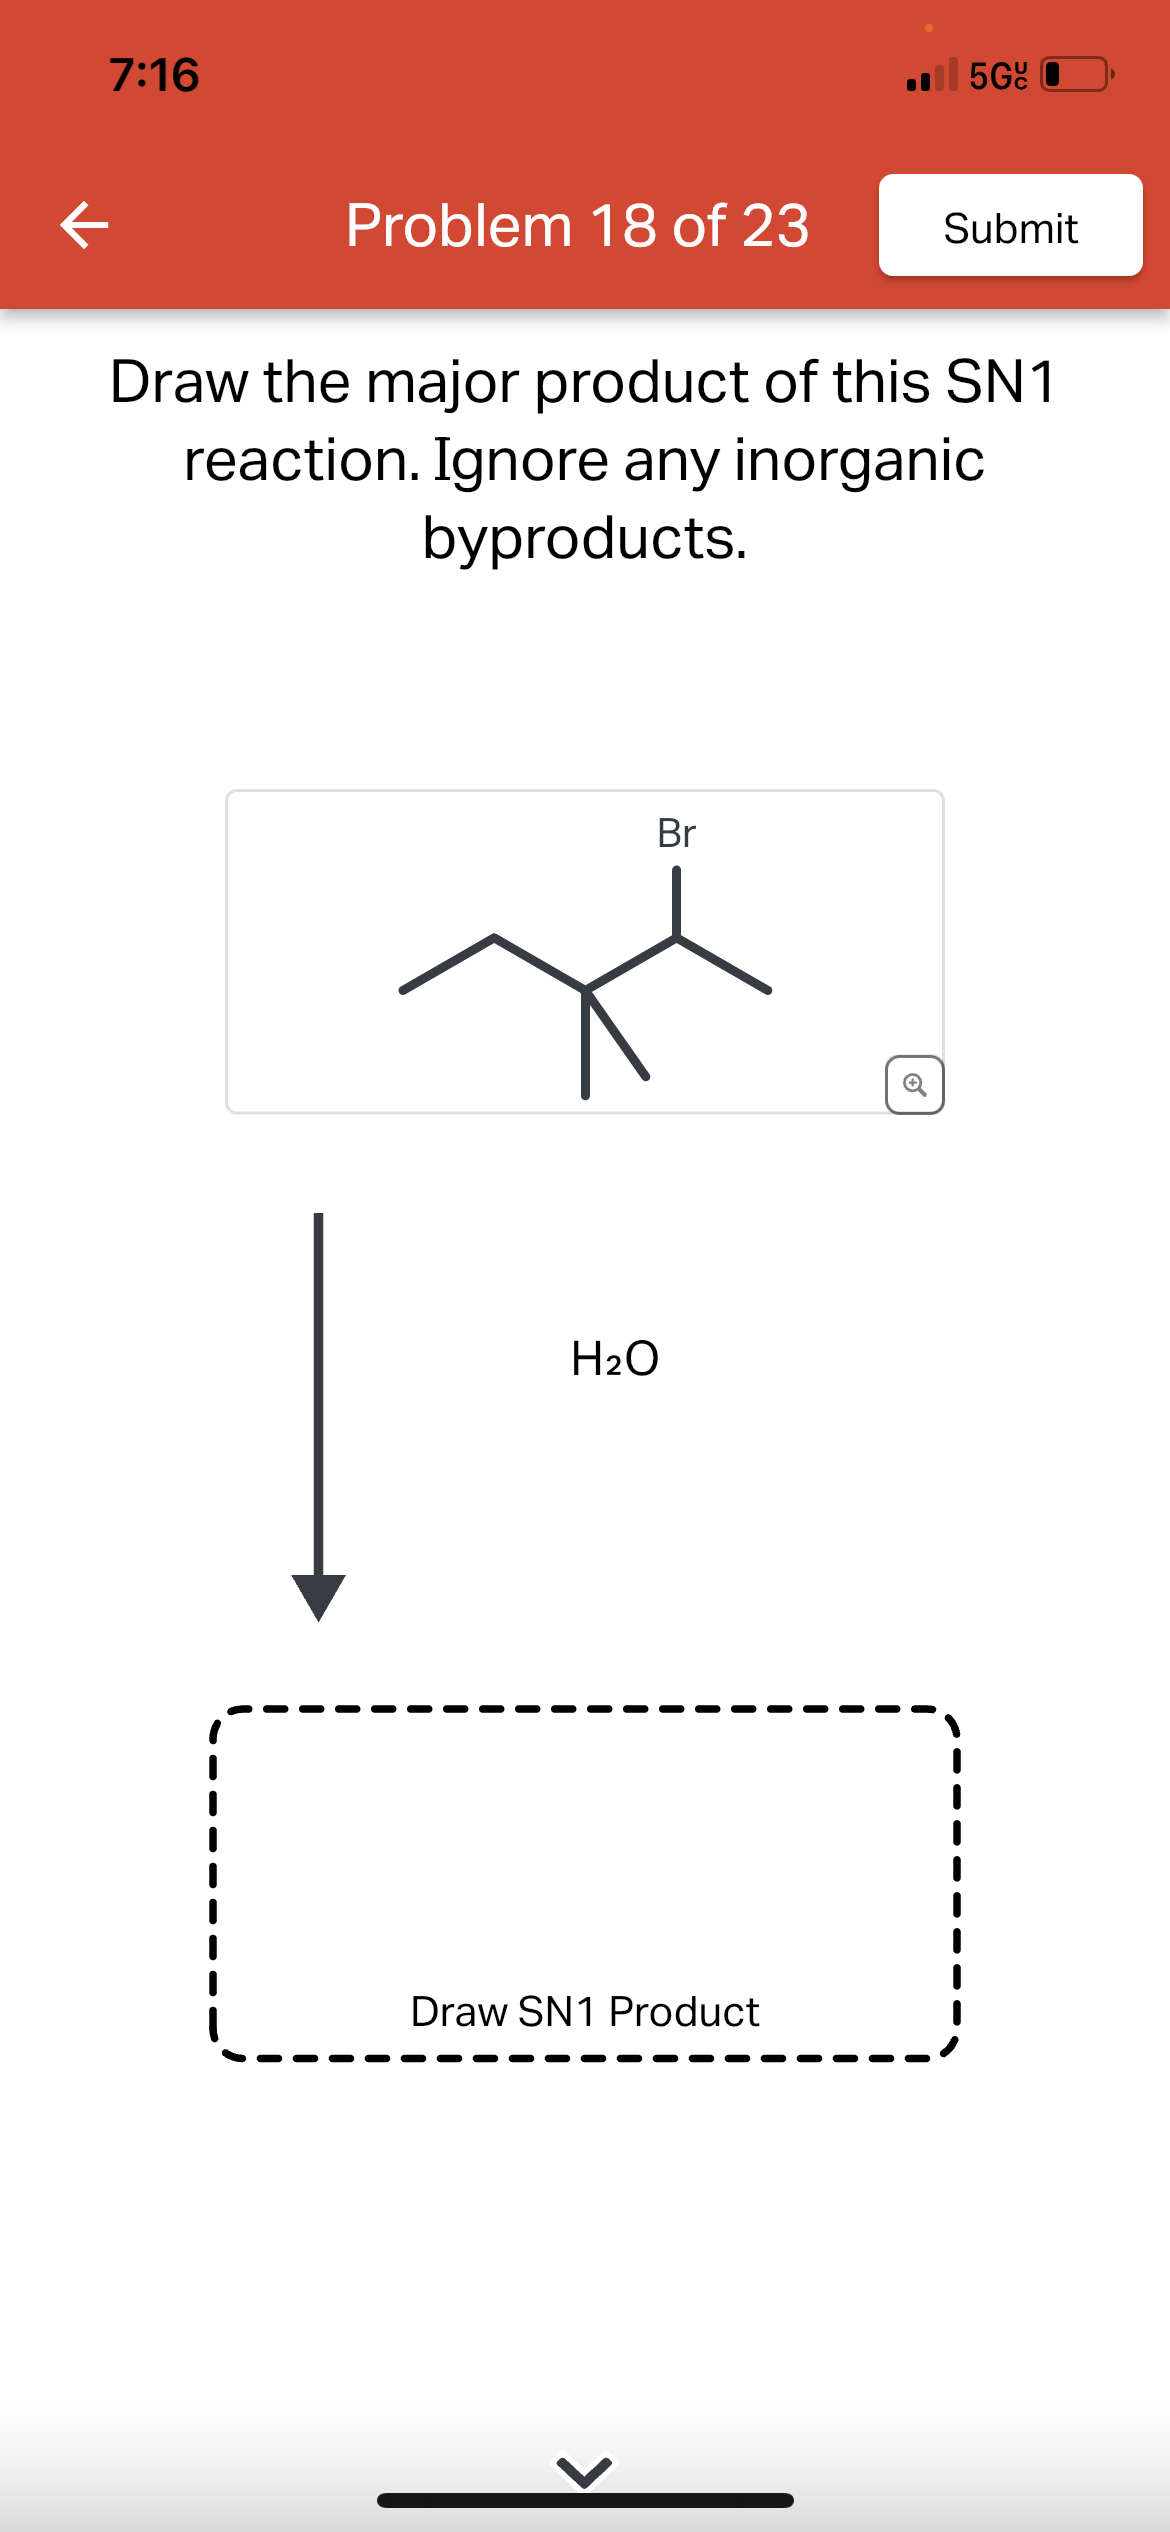 K
7:16
Problem 18 of 23
Br
Draw the major product of this SN1
reaction. Ignore any inorganic
byproducts.
H₂O
5Gc
Draw SN1 Product
Submit